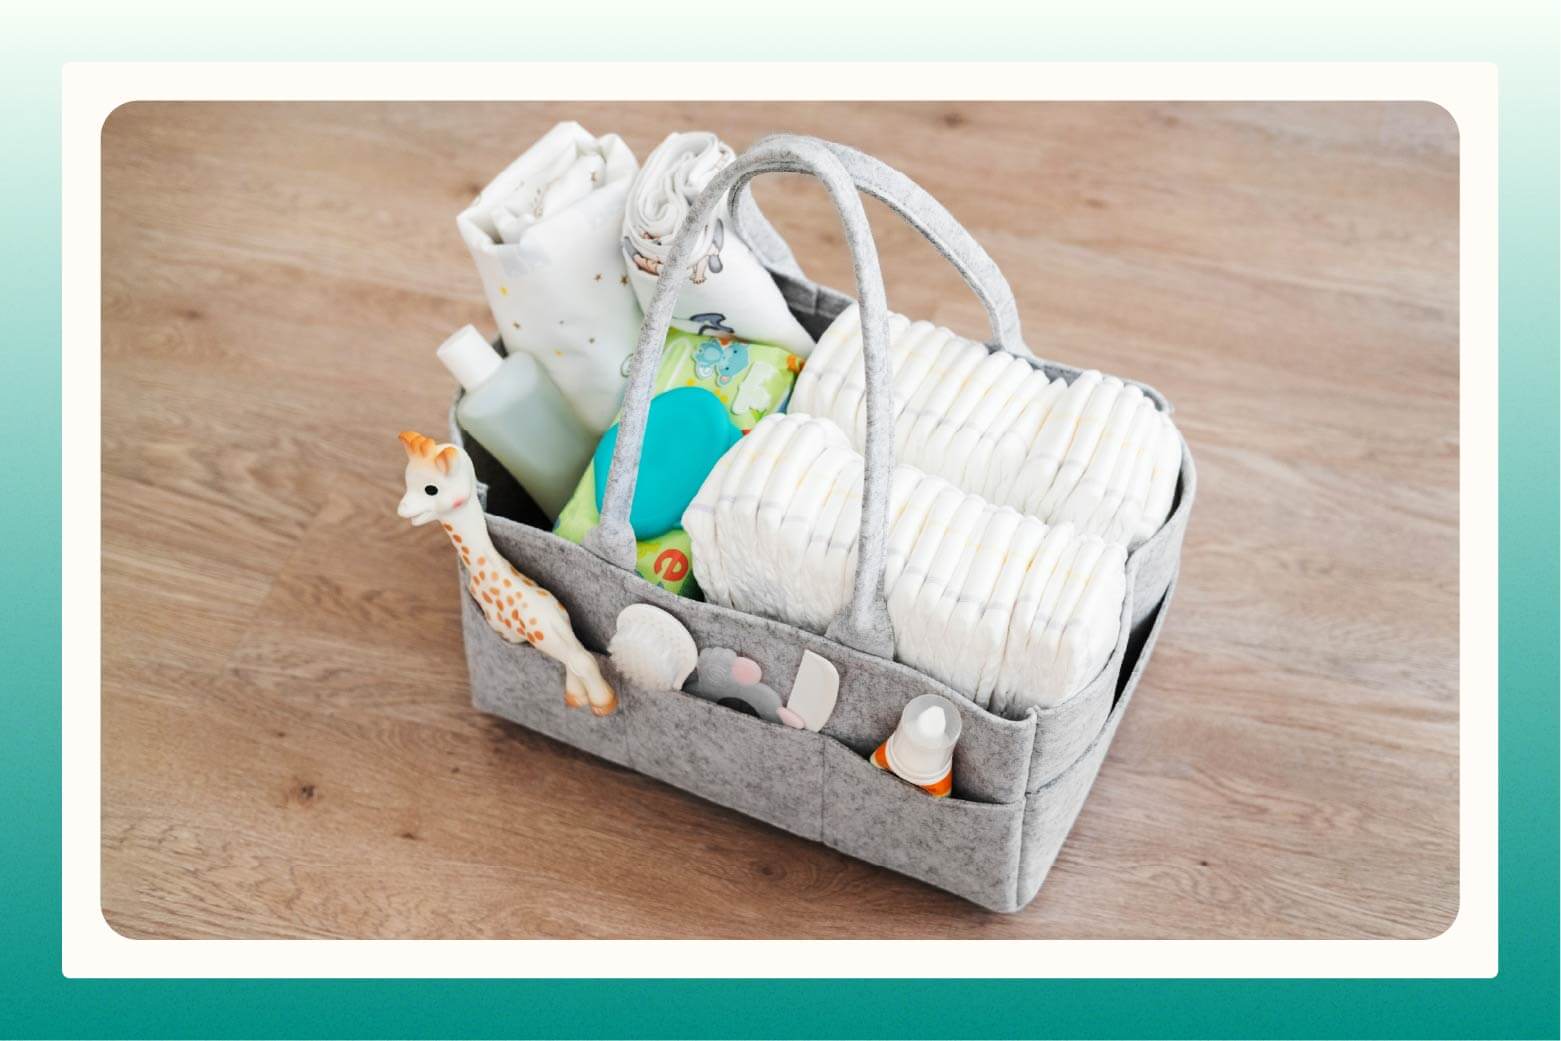 Diaper caddy filled with diapers, wipes, blankets, giraffe toy, brush, comb, and ointments